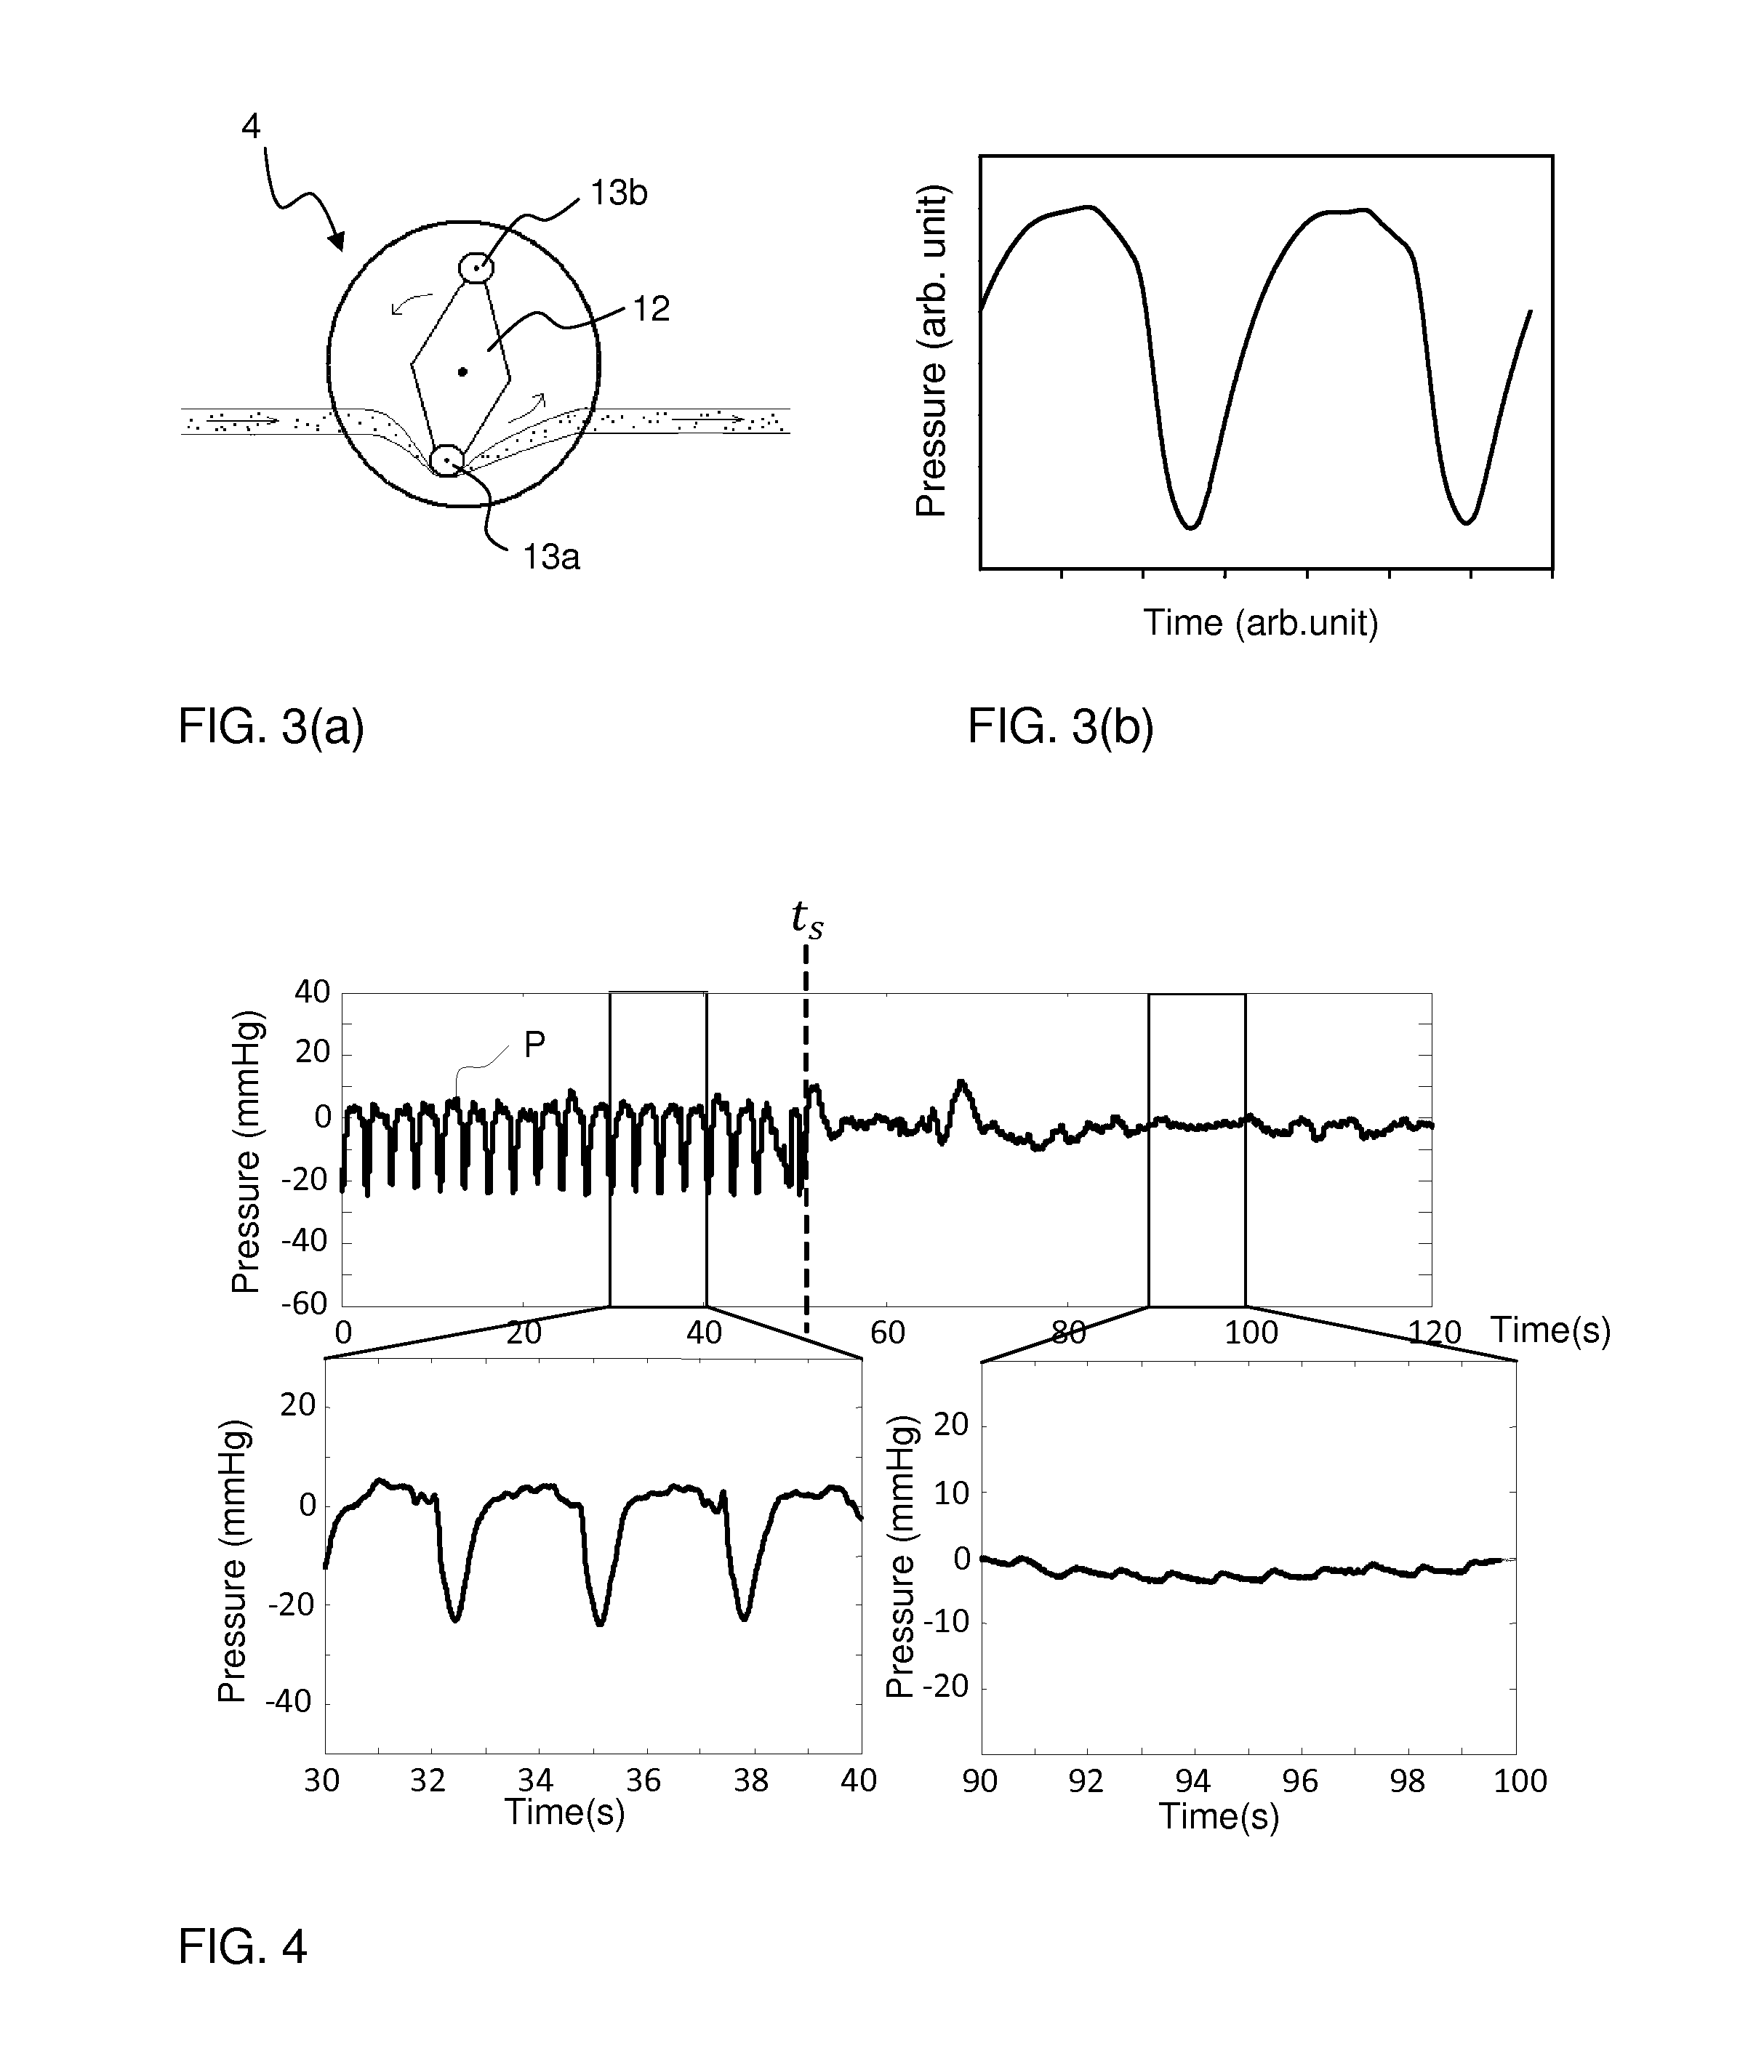 Separation of interference pulses from physiological pulses in a pressure signal